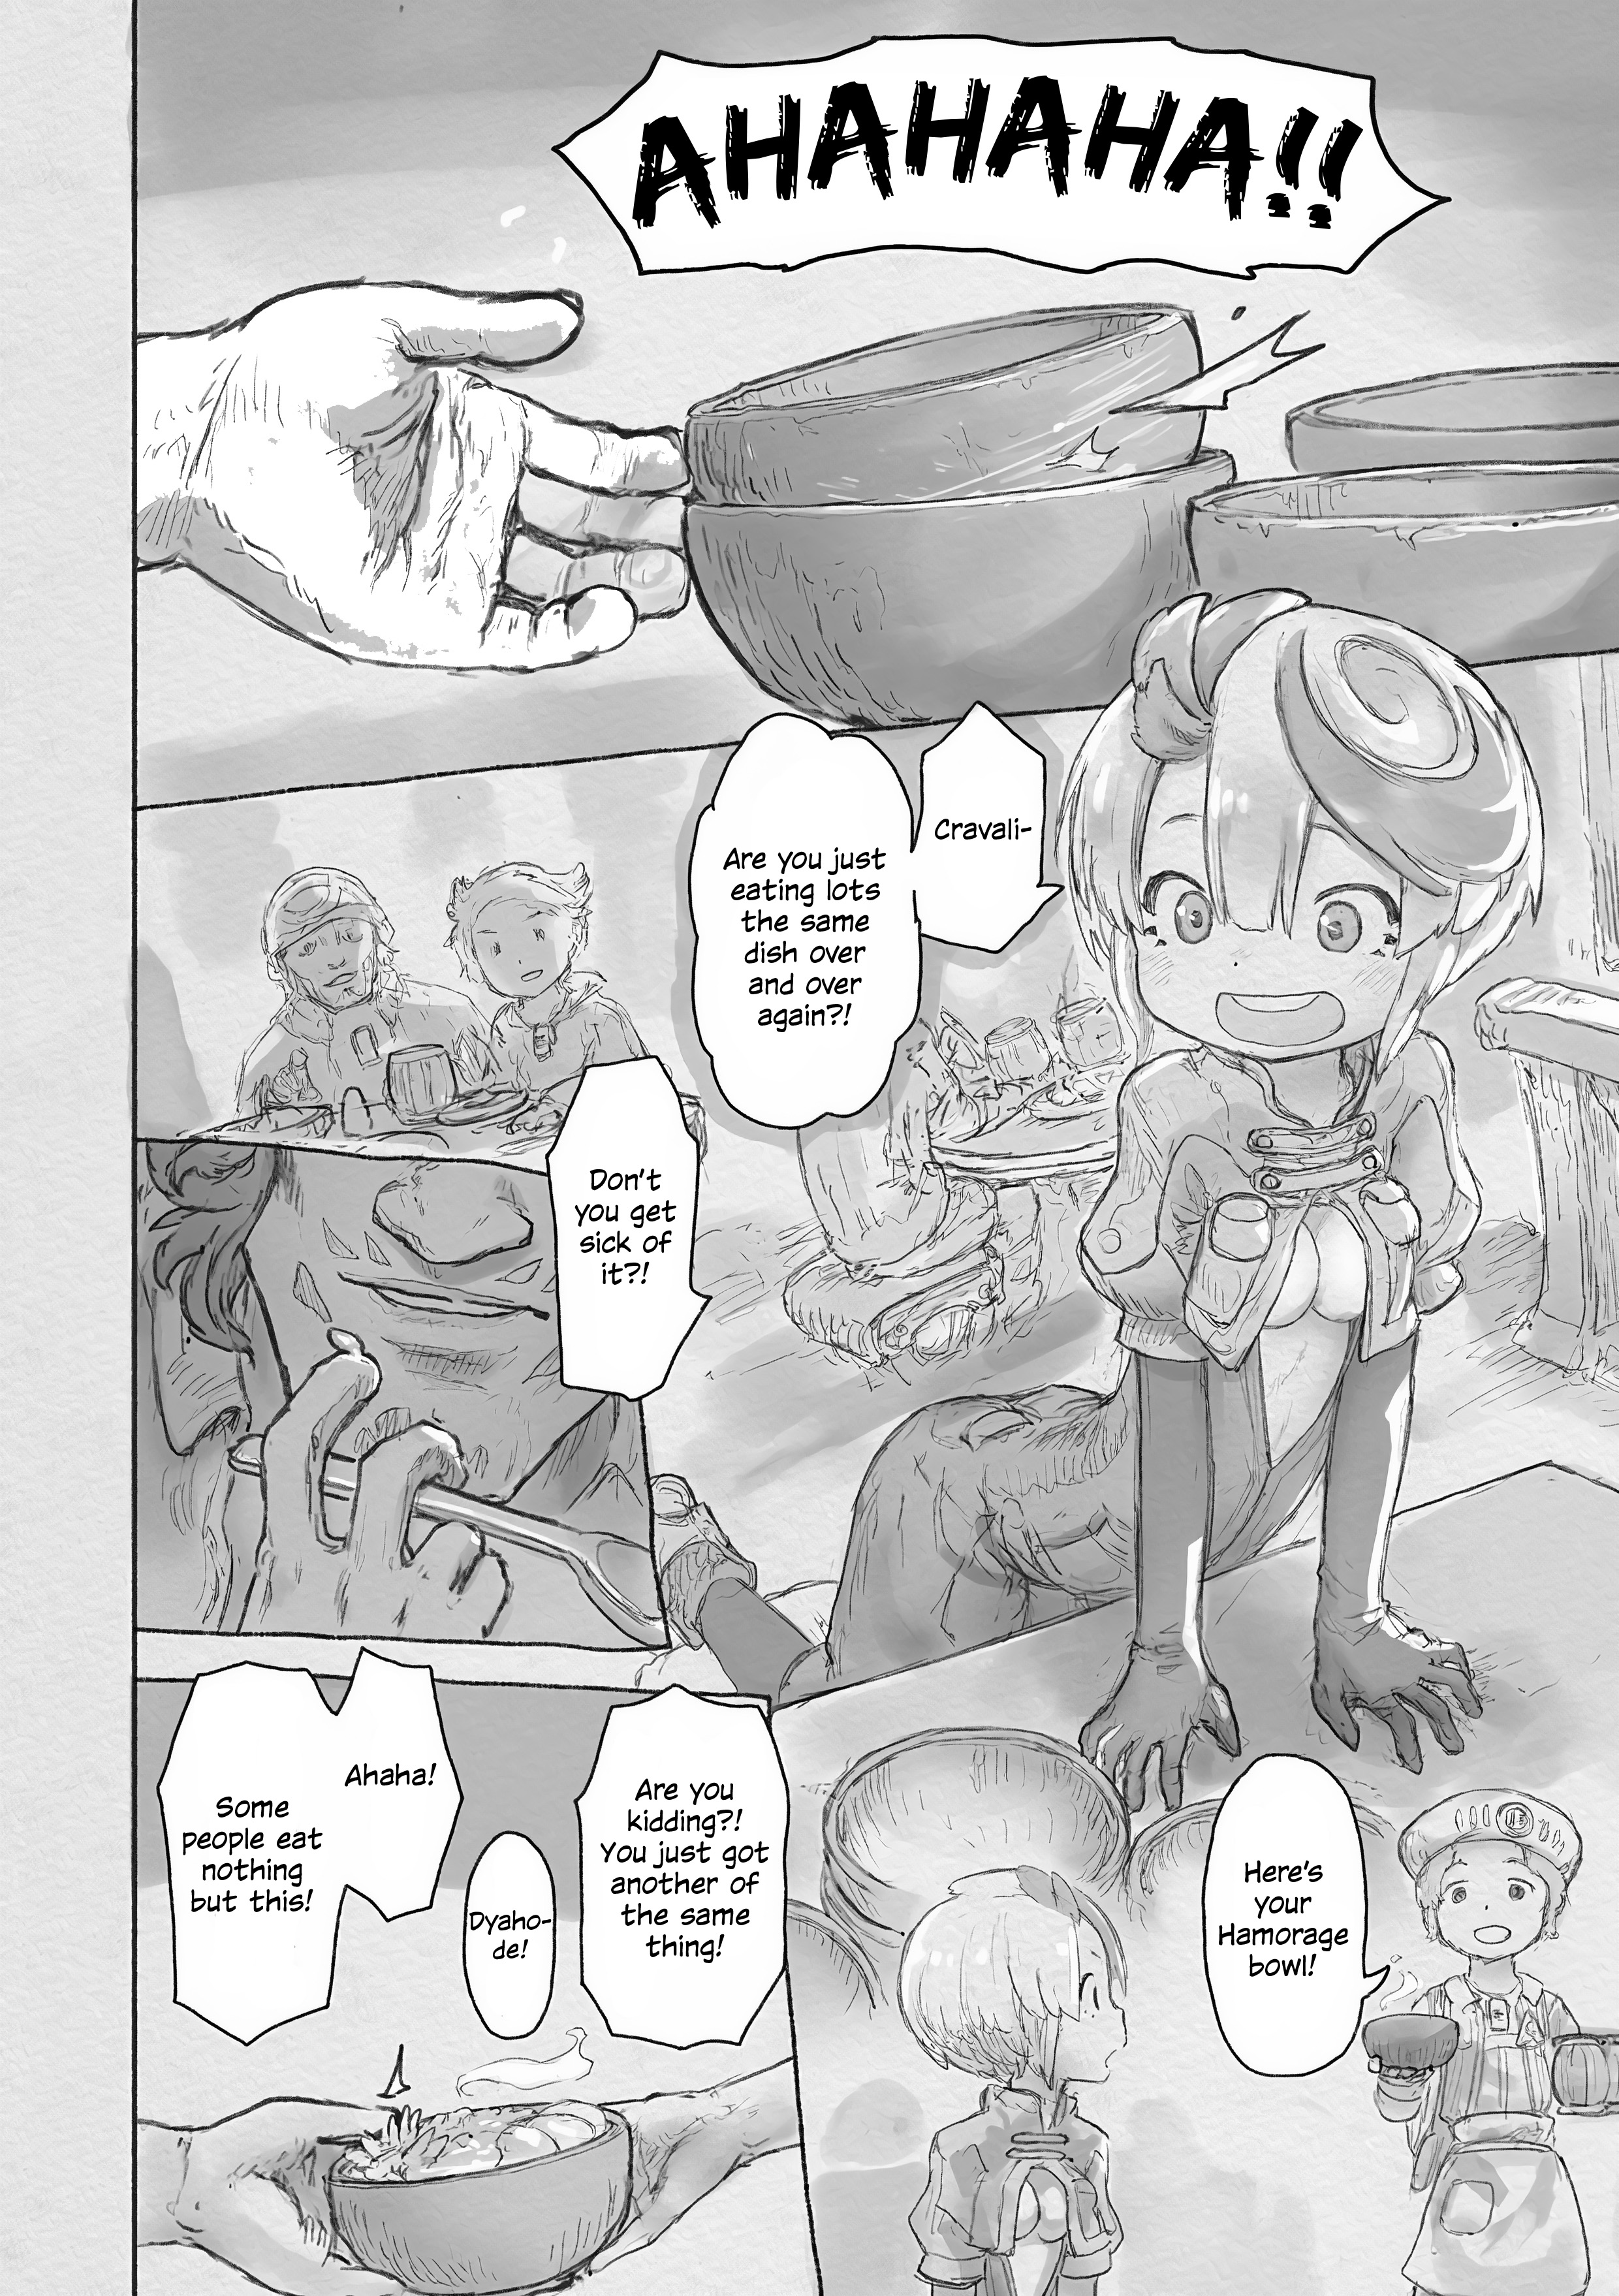 Made in Abyss chapter 63.5 translation is out! As the main group inspects a  place, an unexpected encounter leads to many new faces. - 9GAG